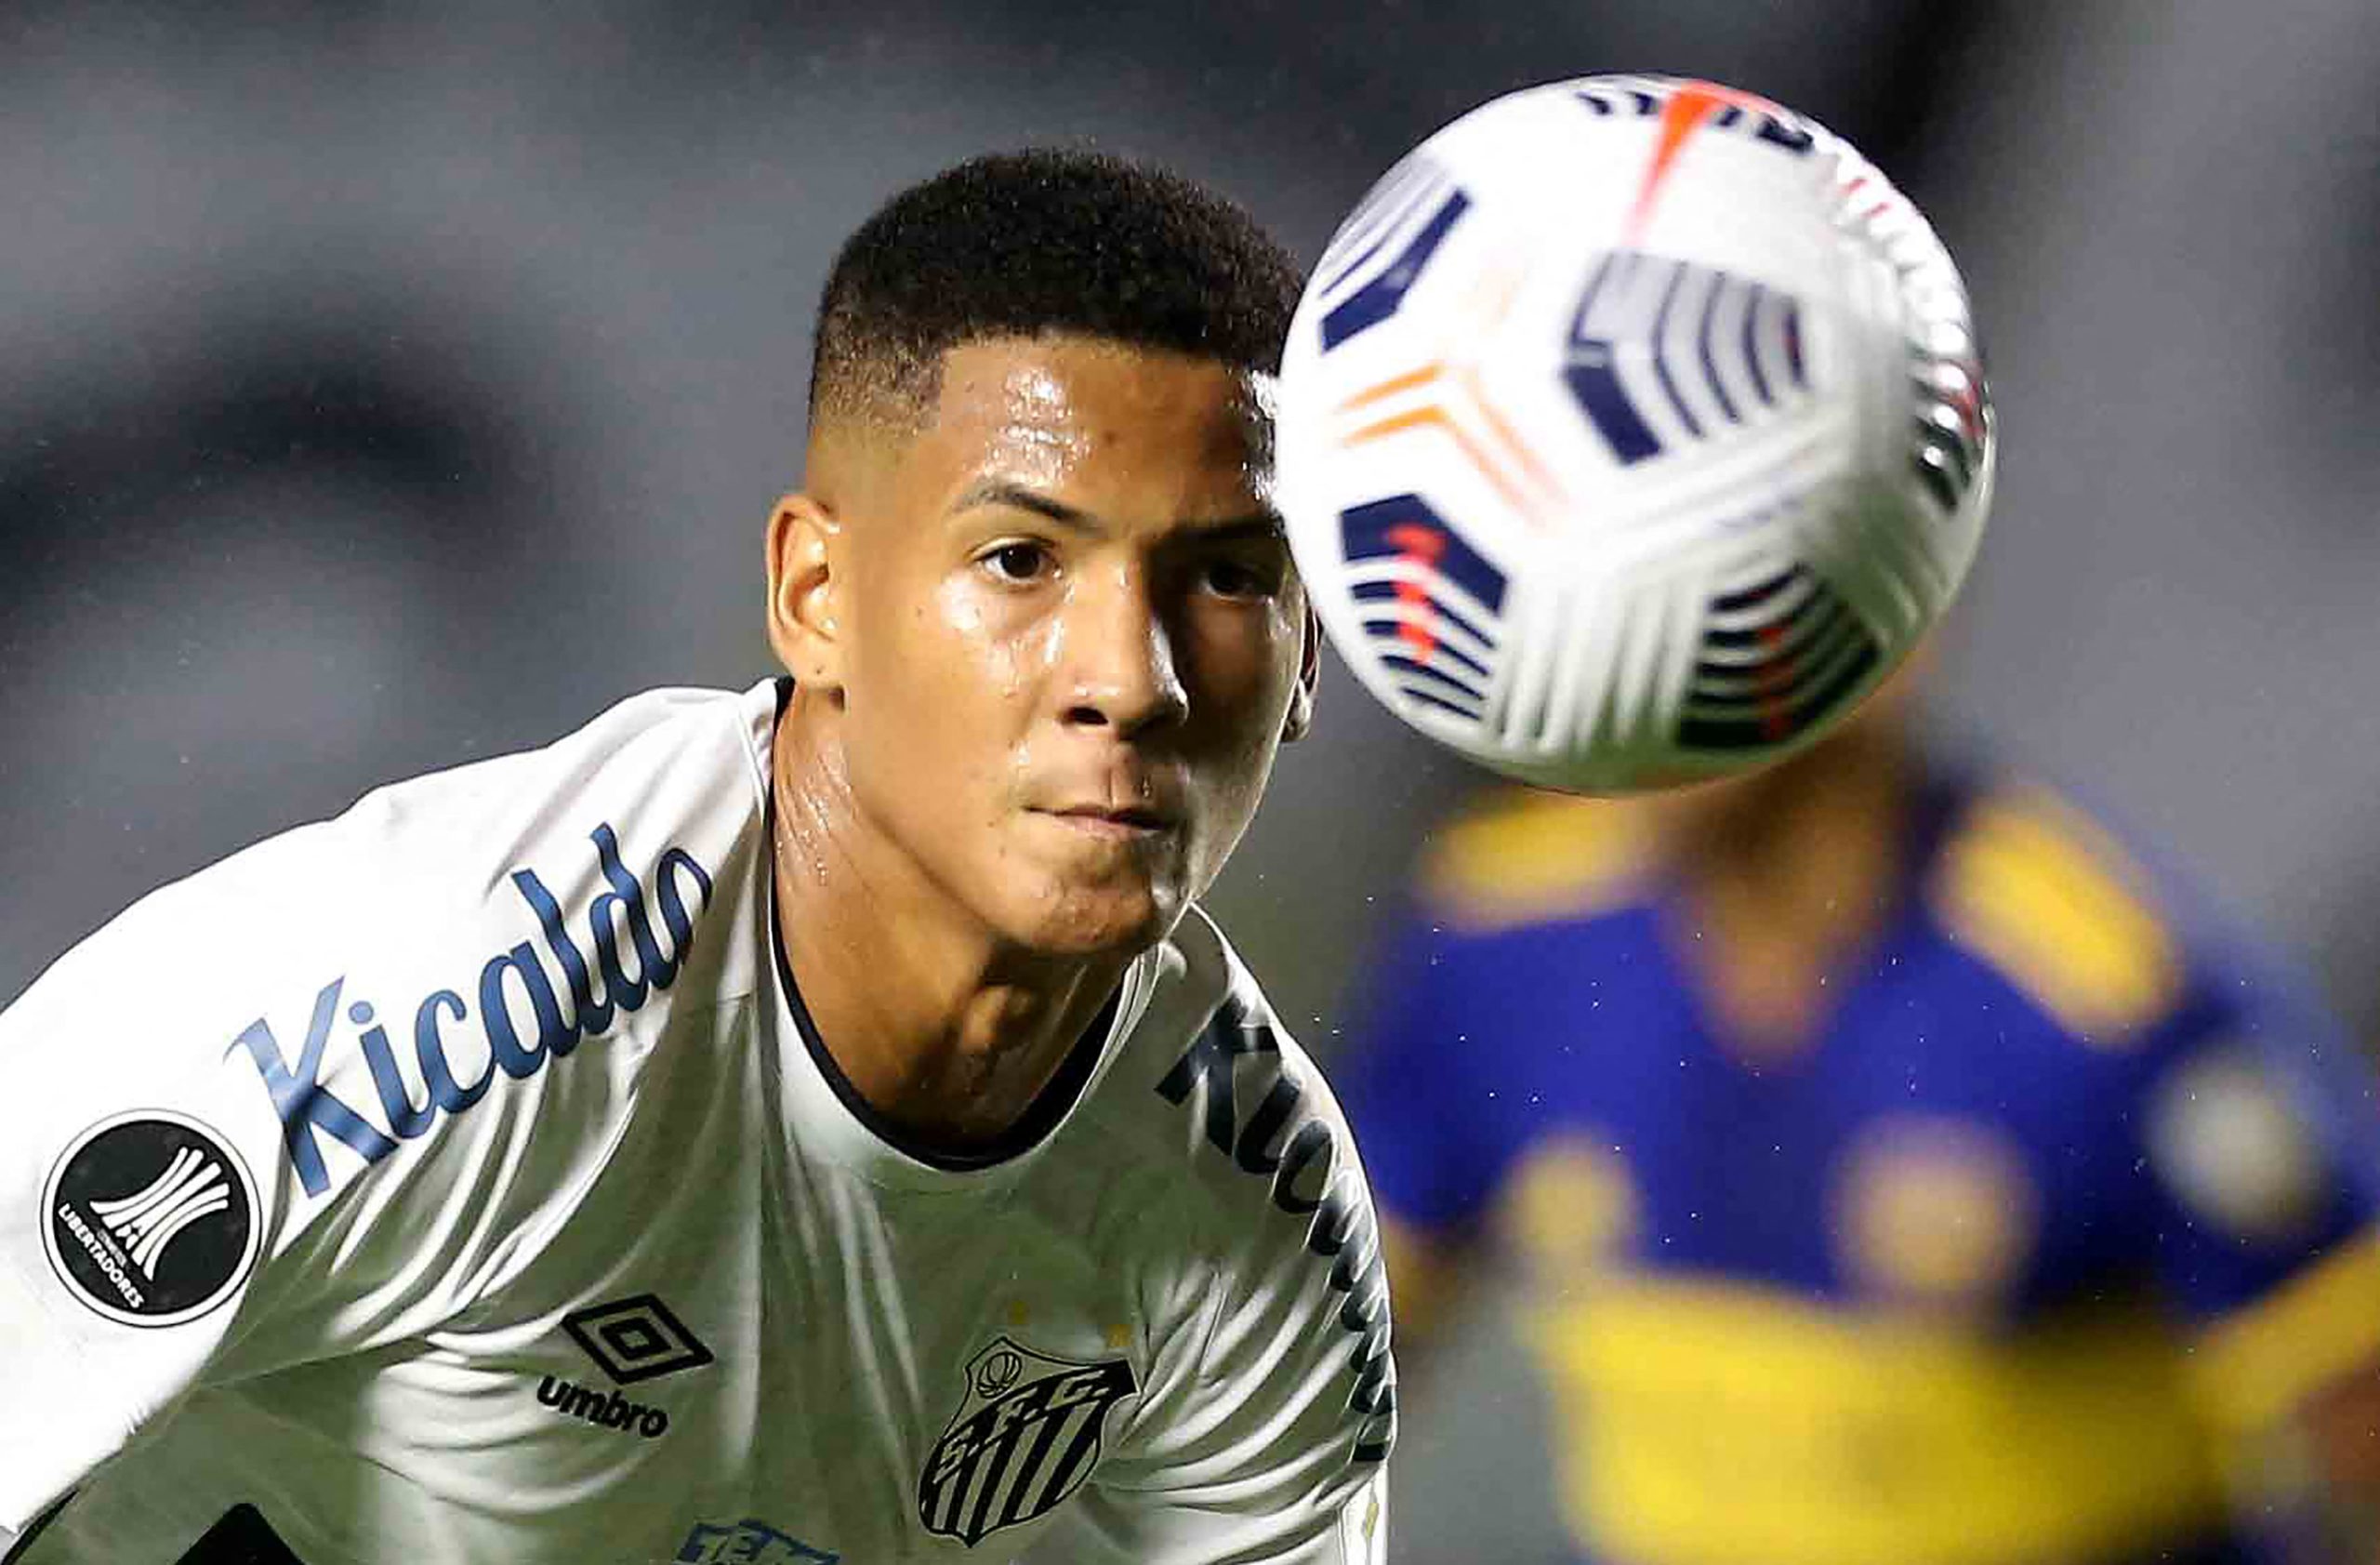 Gabriel has been breaking records in the Brazilian League; the 18-year-old became the youngest player to make his debut against Fluminense at 15 years and 308 days.